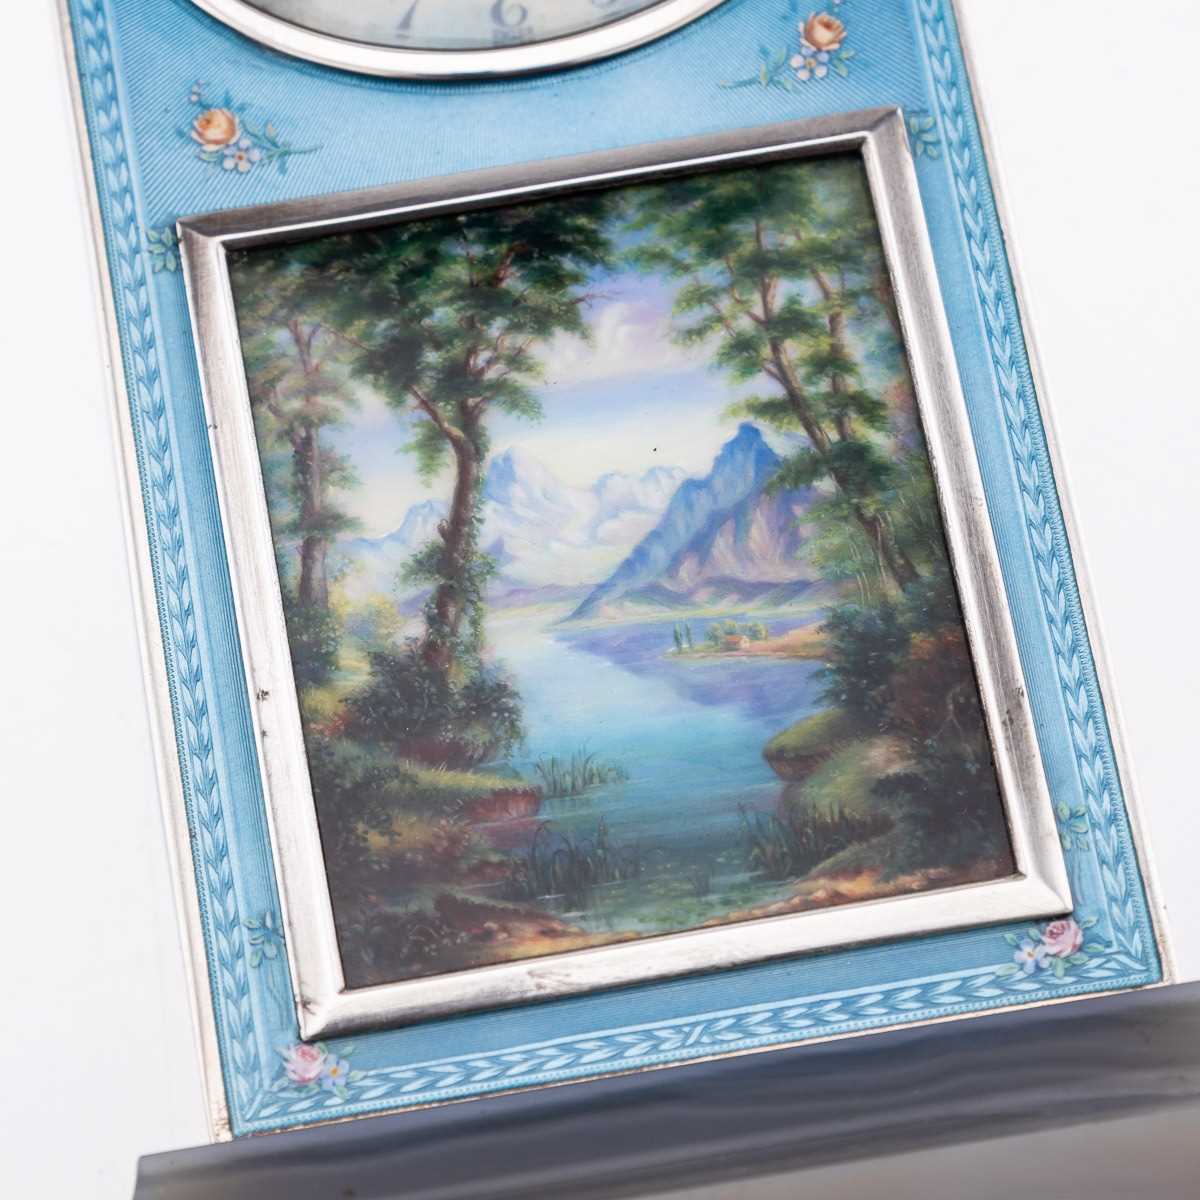 A FINE EARLY 20TH CENTURY SWISS SOLID SILVER AND GUILLOCHE ENAMEL TRAVEL CLOCK IN DISPLAY CASE - Image 19 of 62